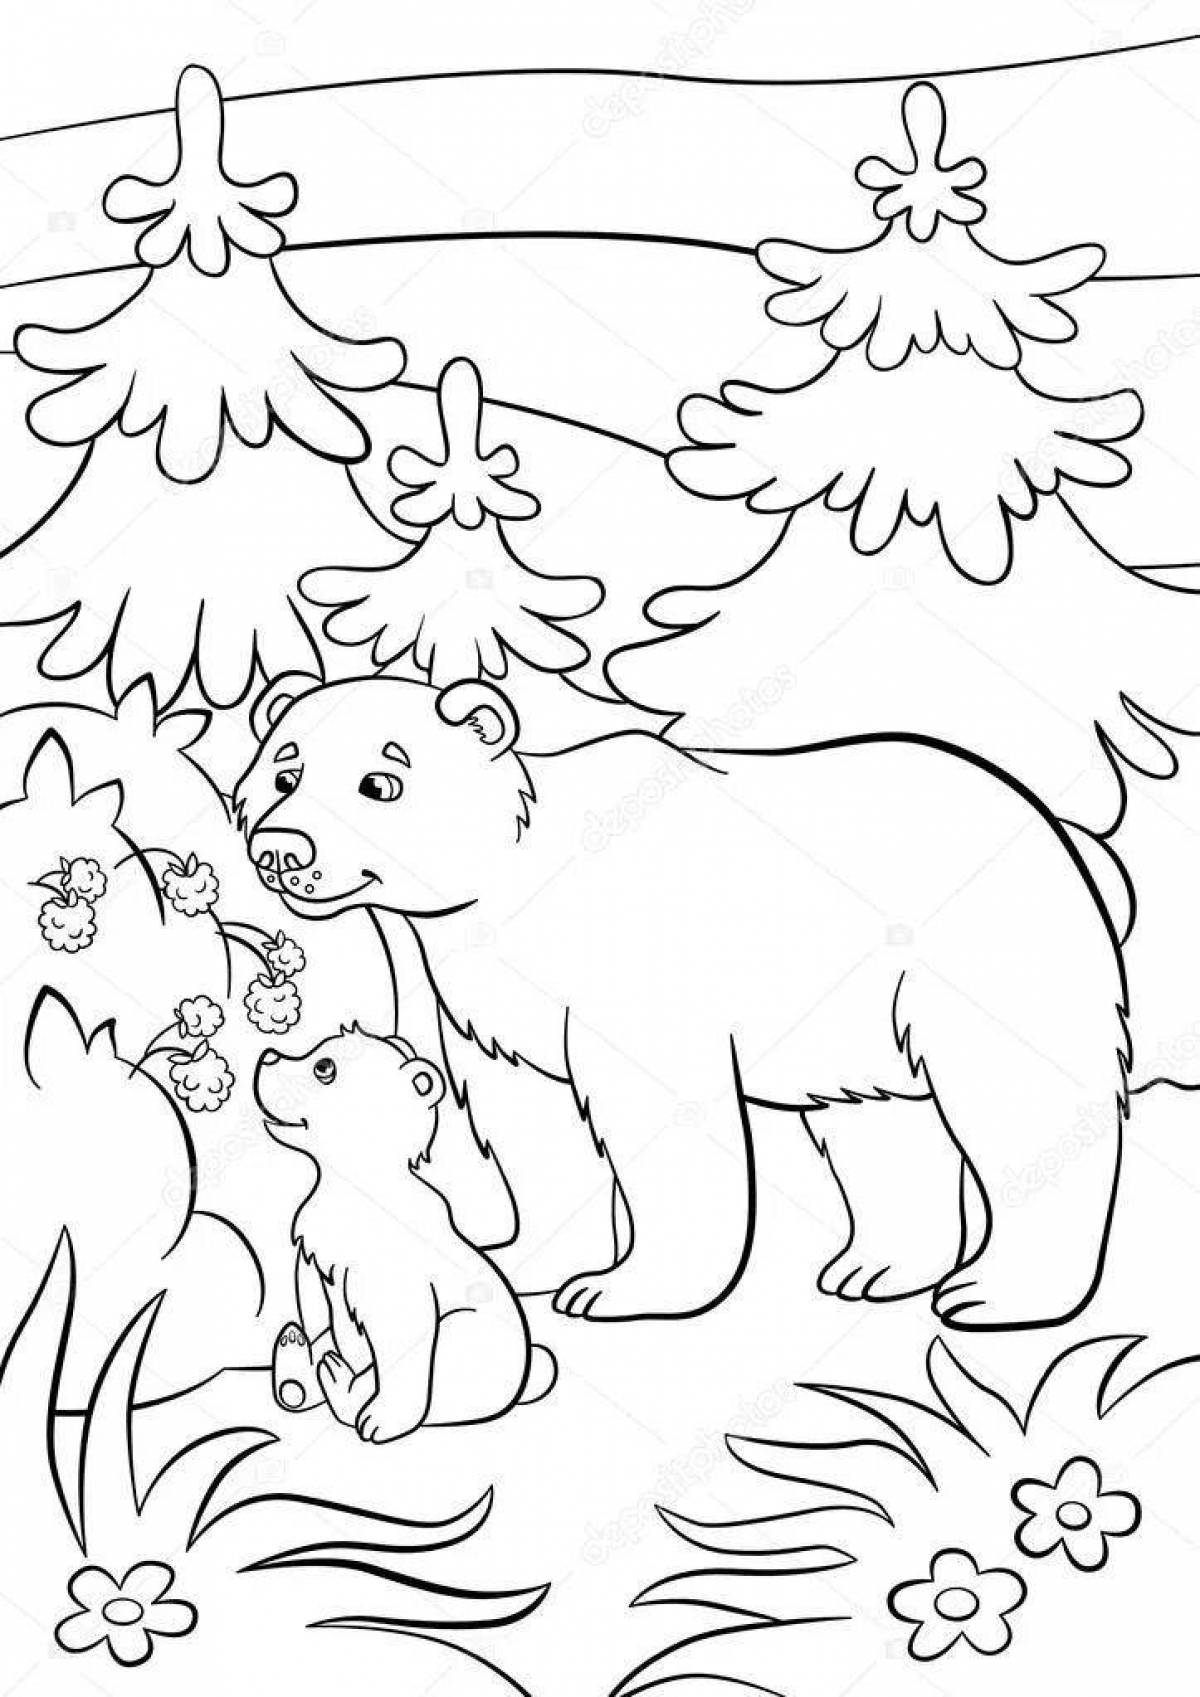 Joyful bear in the forest coloring book